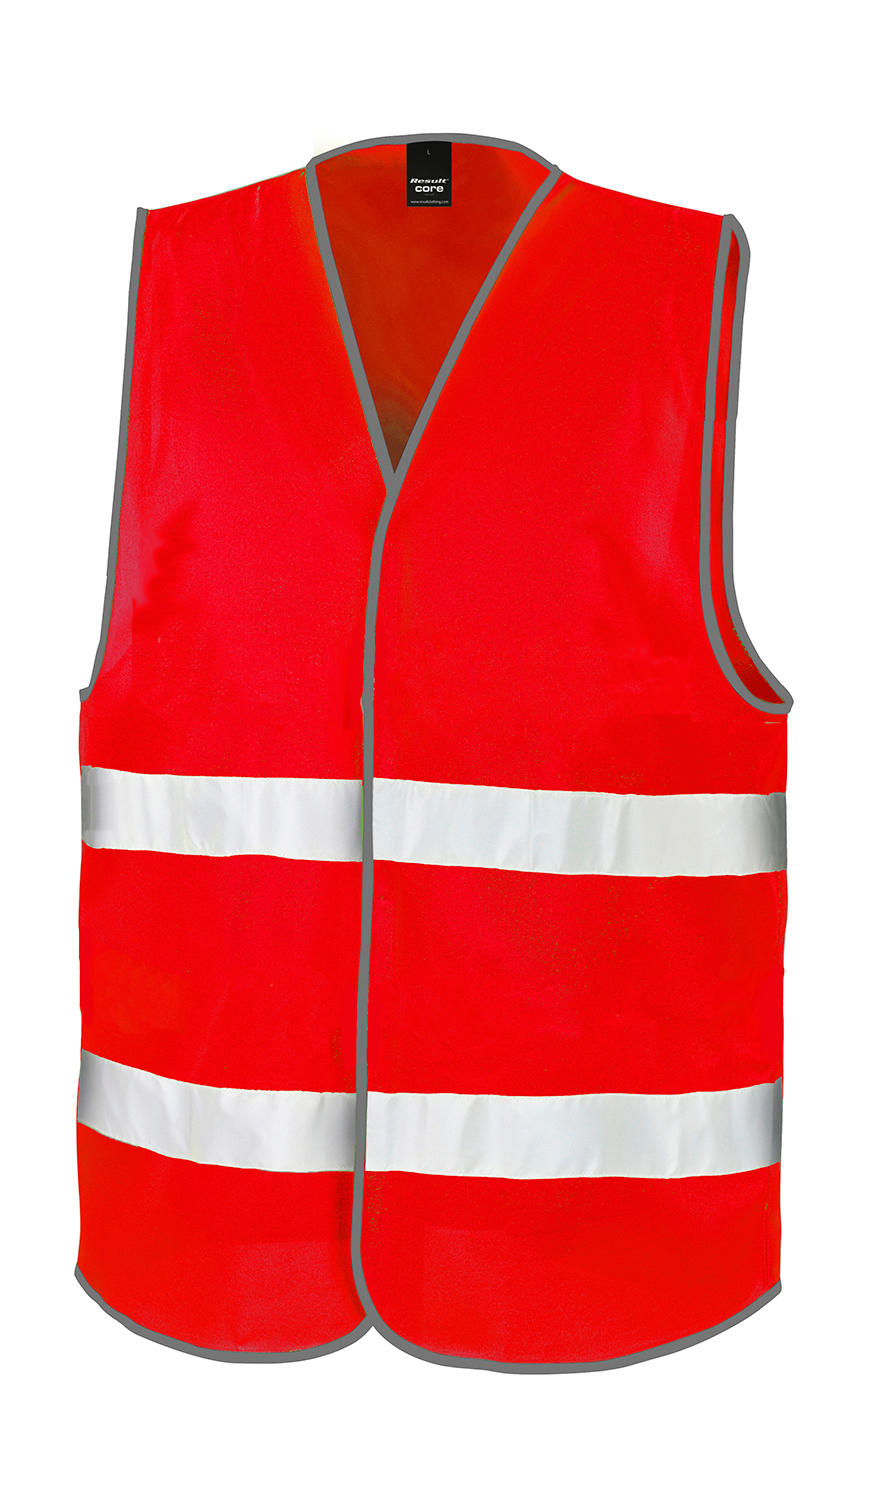 Core Enhanced Visibility Vest - red